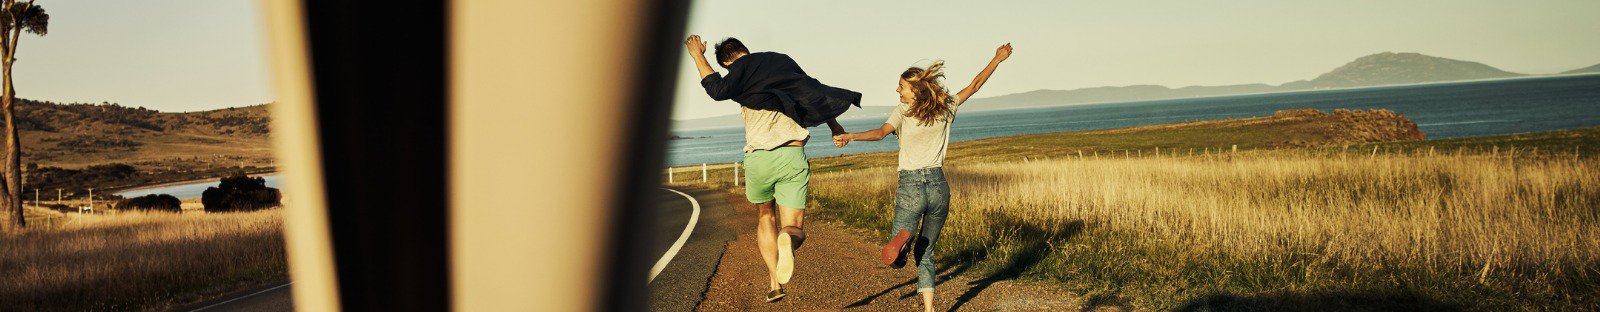 Couple running to beach in front of parked car 